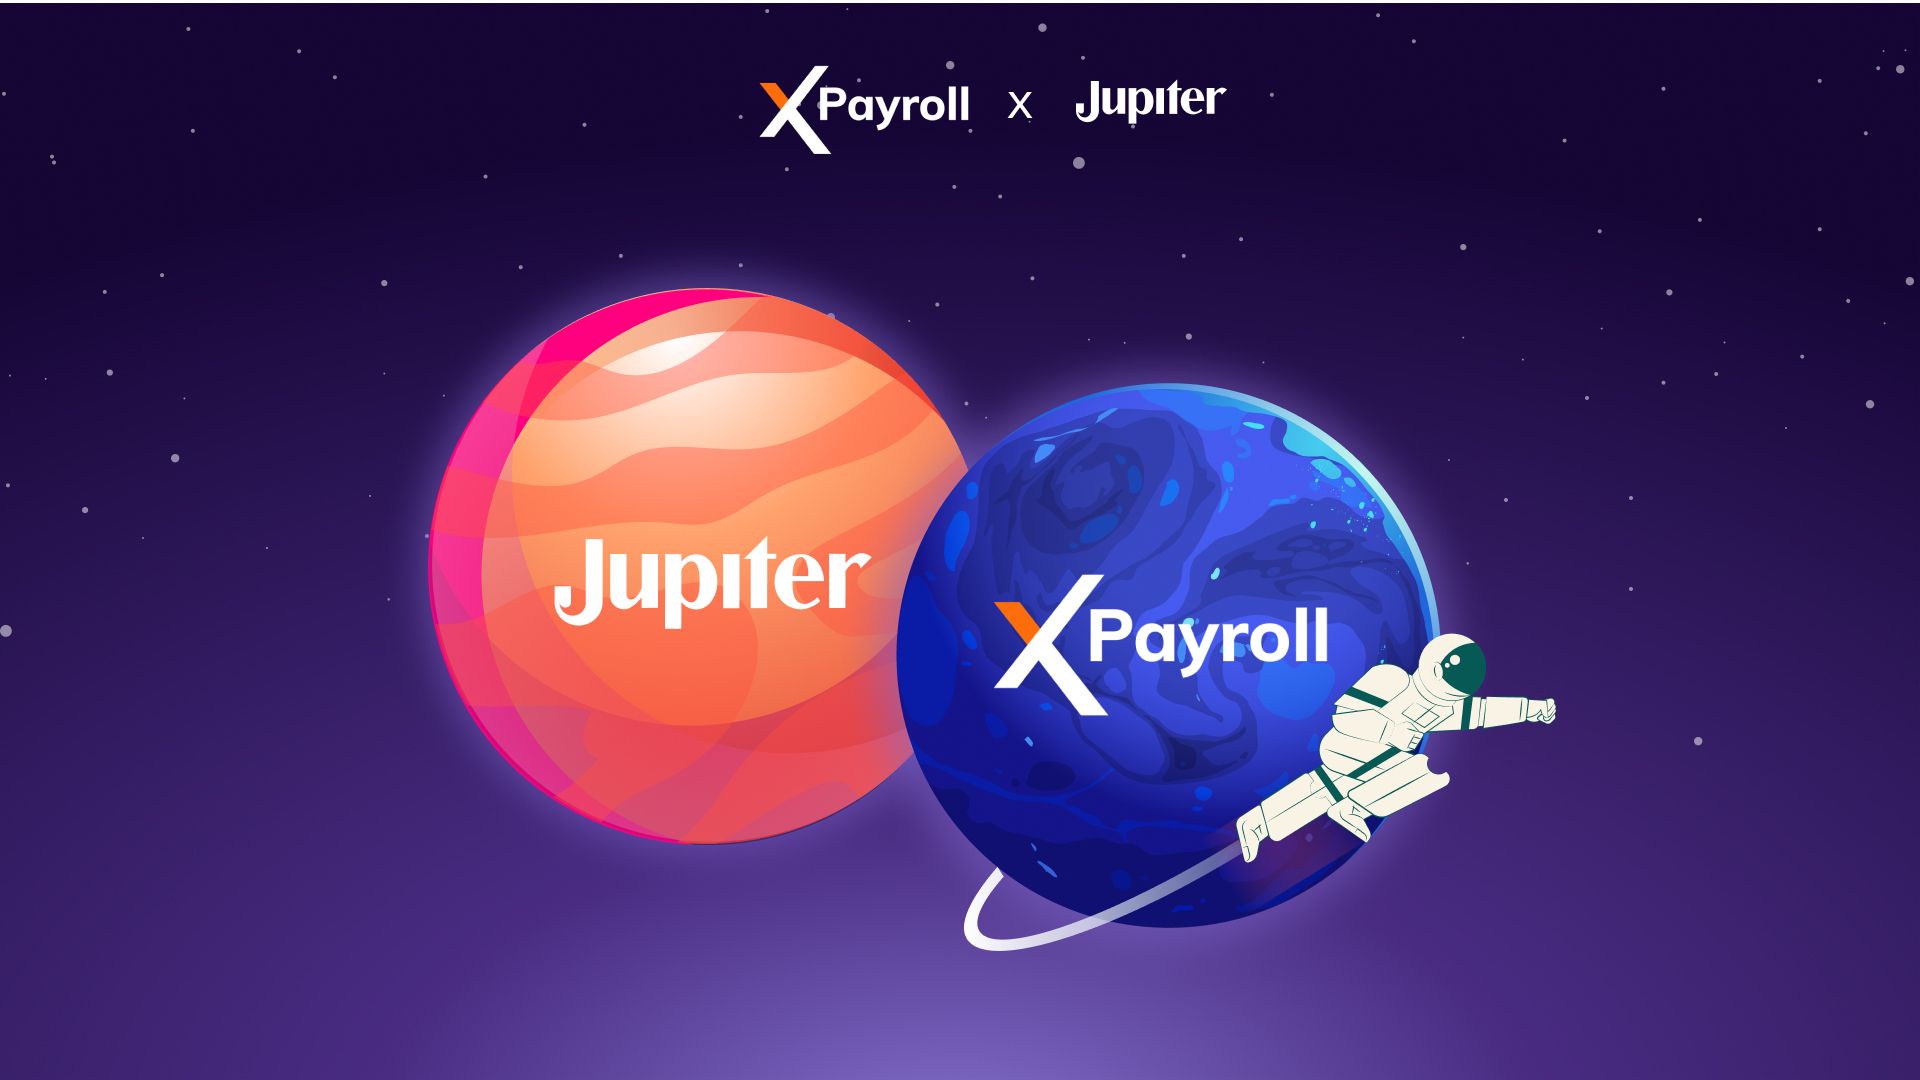 Jupiter partners with RazorpayX to provide salary accounts to all Payroll users